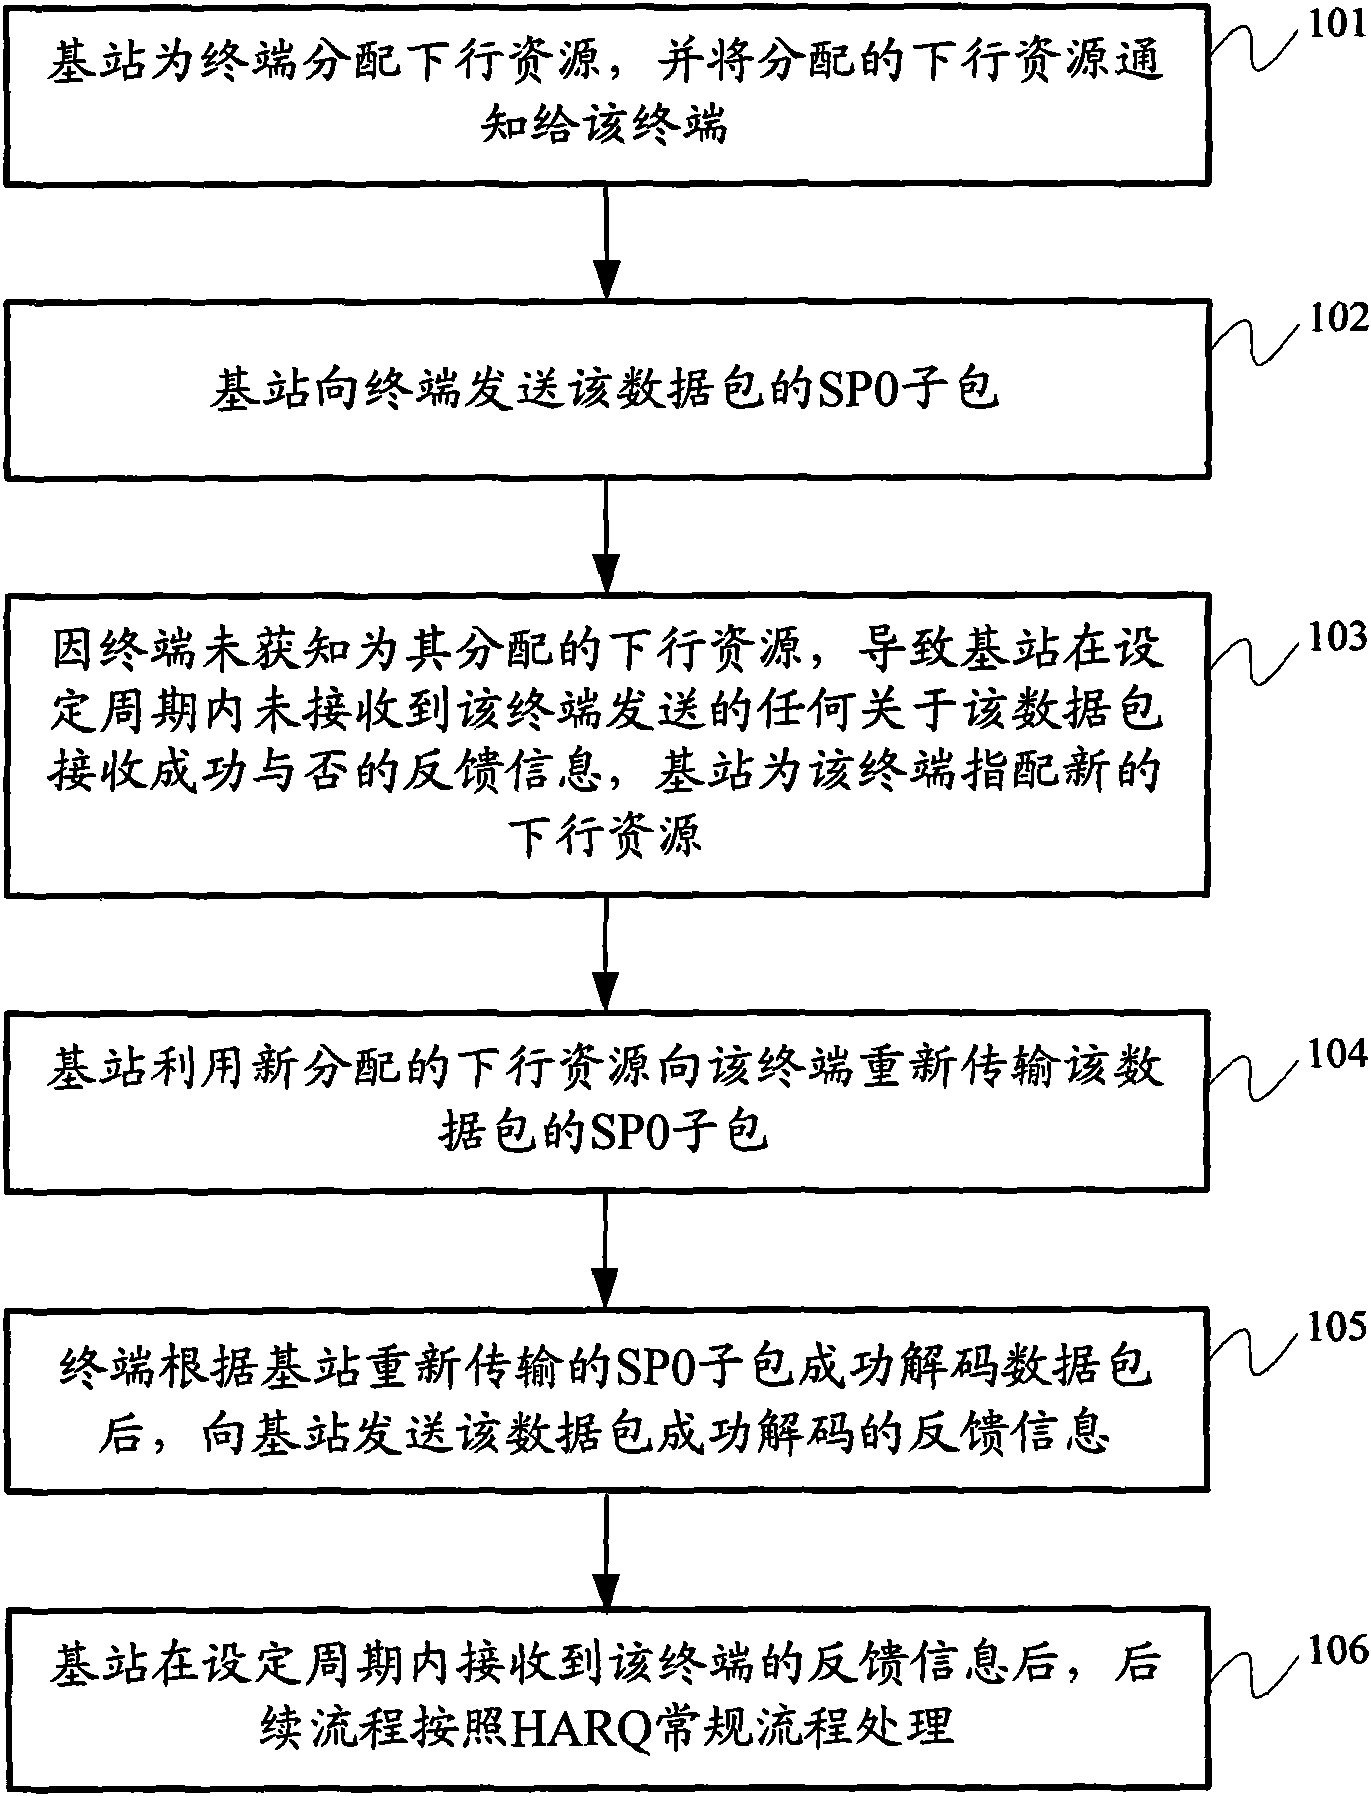 Hybrid automatic repeat request (HARQ) method and base station equipment